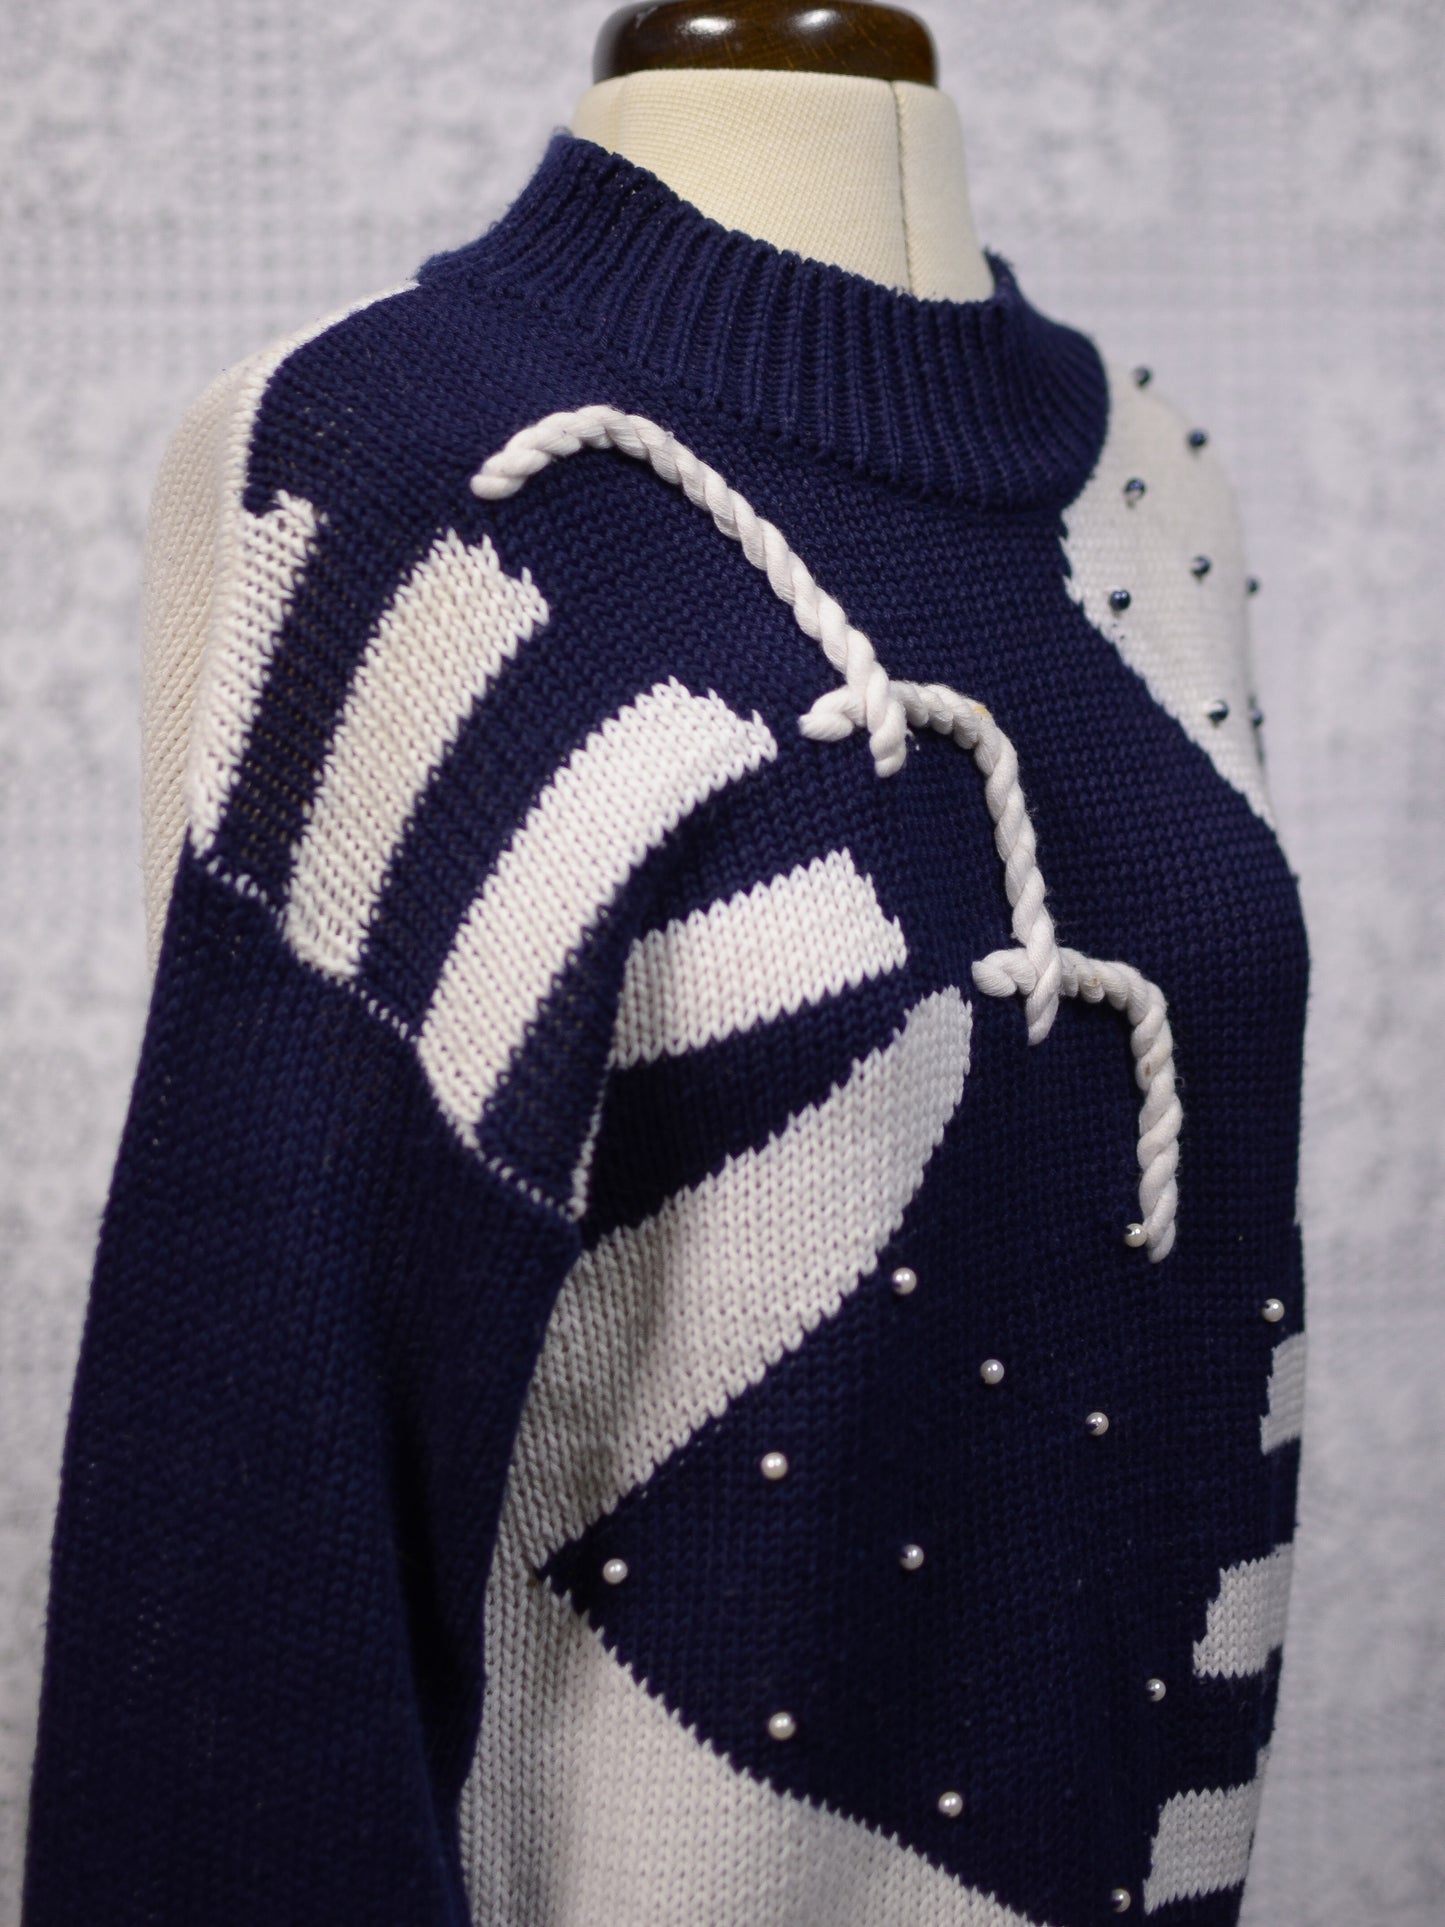 1980s navy blue and white striped nautical jumper